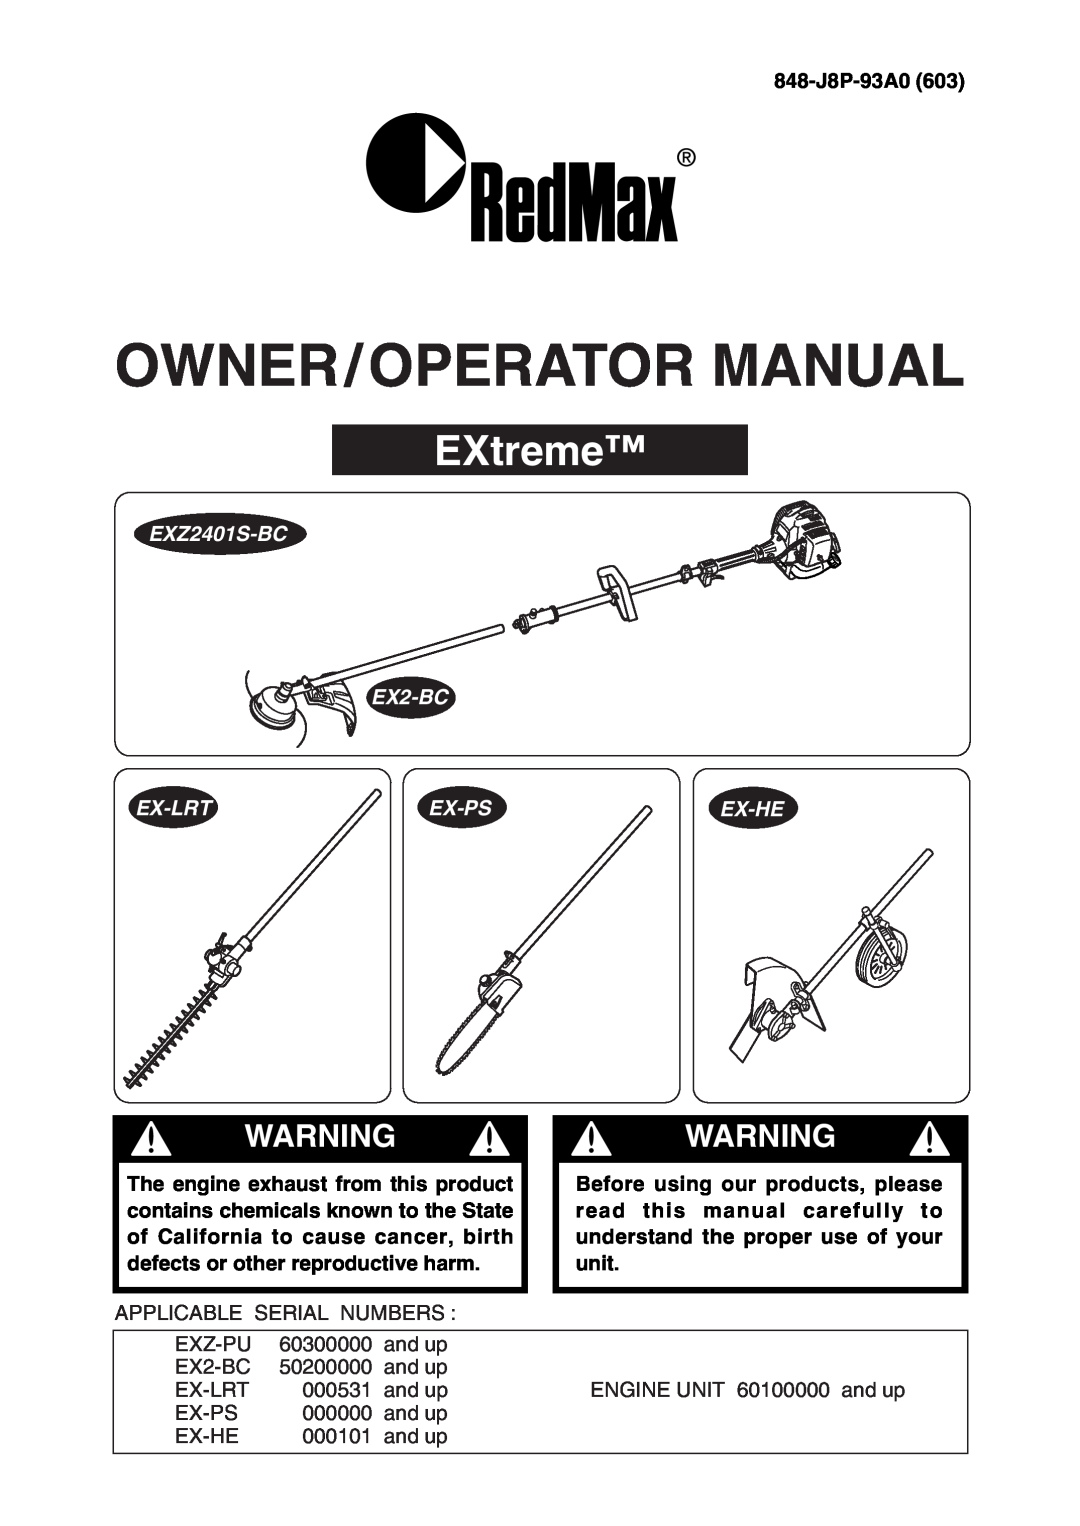 RedMax manual EXtreme, EXZ2401S-BC EX2-BC, Ex-Lrt, Ex-Ps, Ex-He, Owner/Operator Manual, Warning Warning 